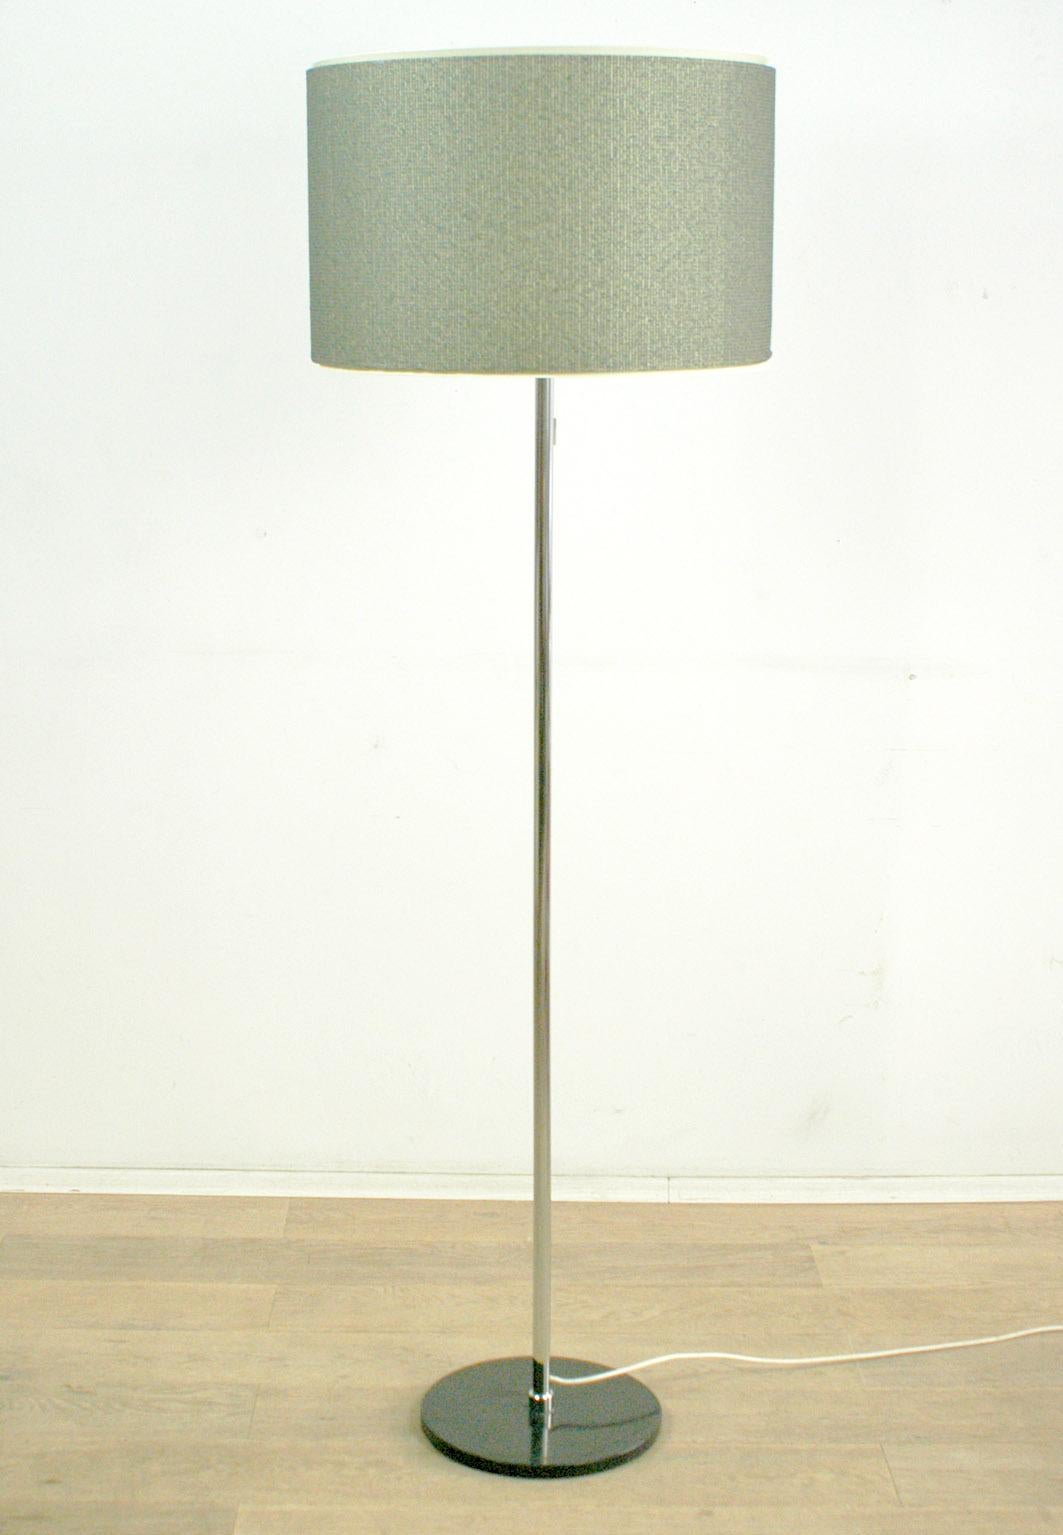 Charming 1960s floor lamp in classical shape with black lacquered metal base and chrome stem, original grey shade.
The light can be switched on separately in upper, middle or lower section of the shade, which gives great and different light